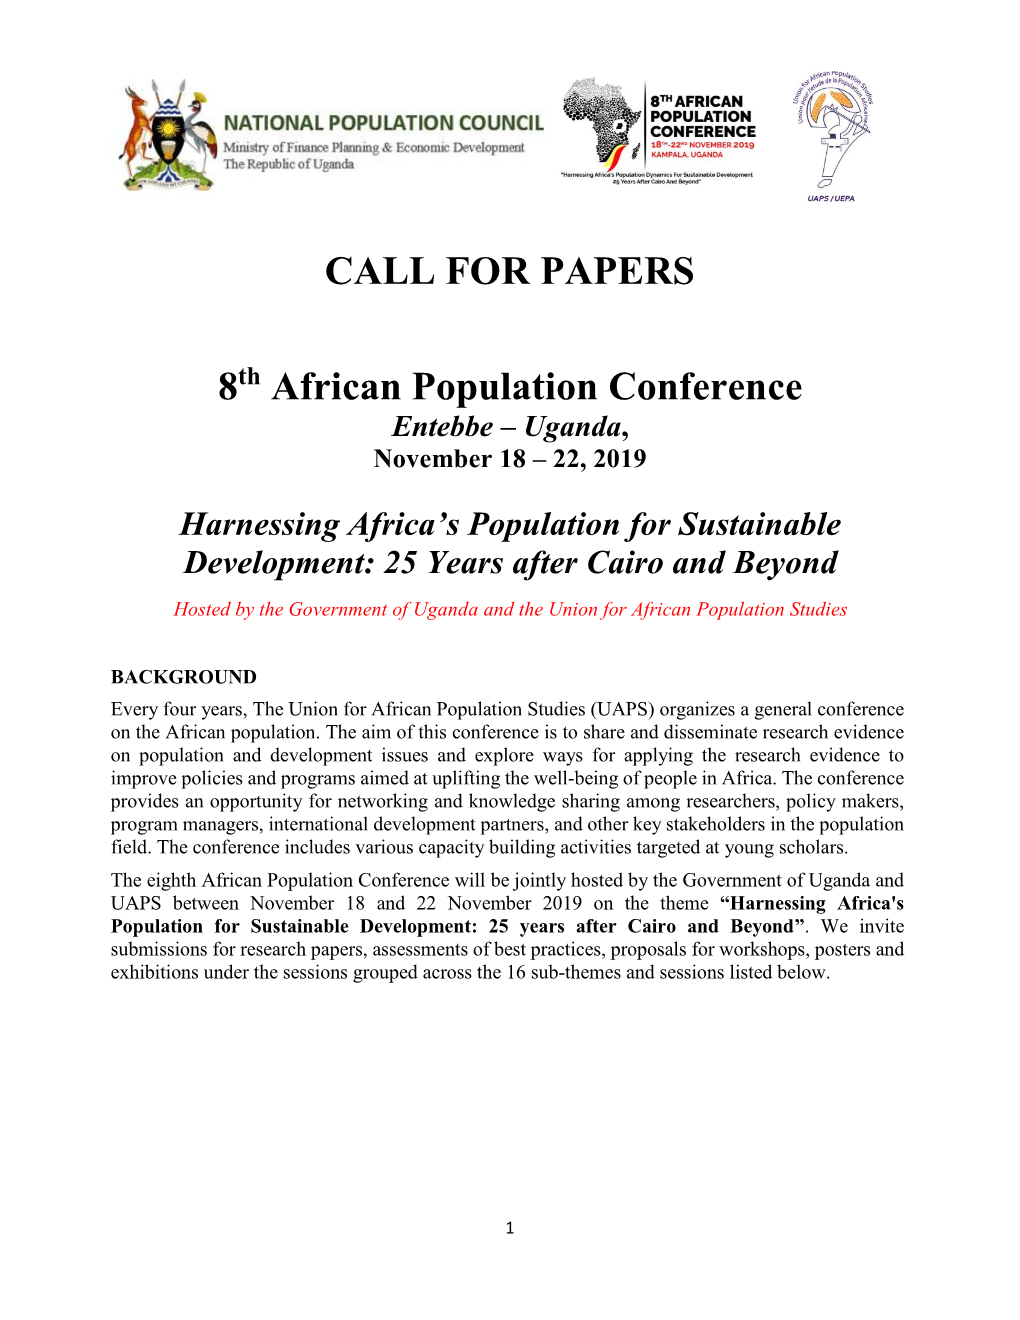 CALL for PAPERS 8 African Population Conference